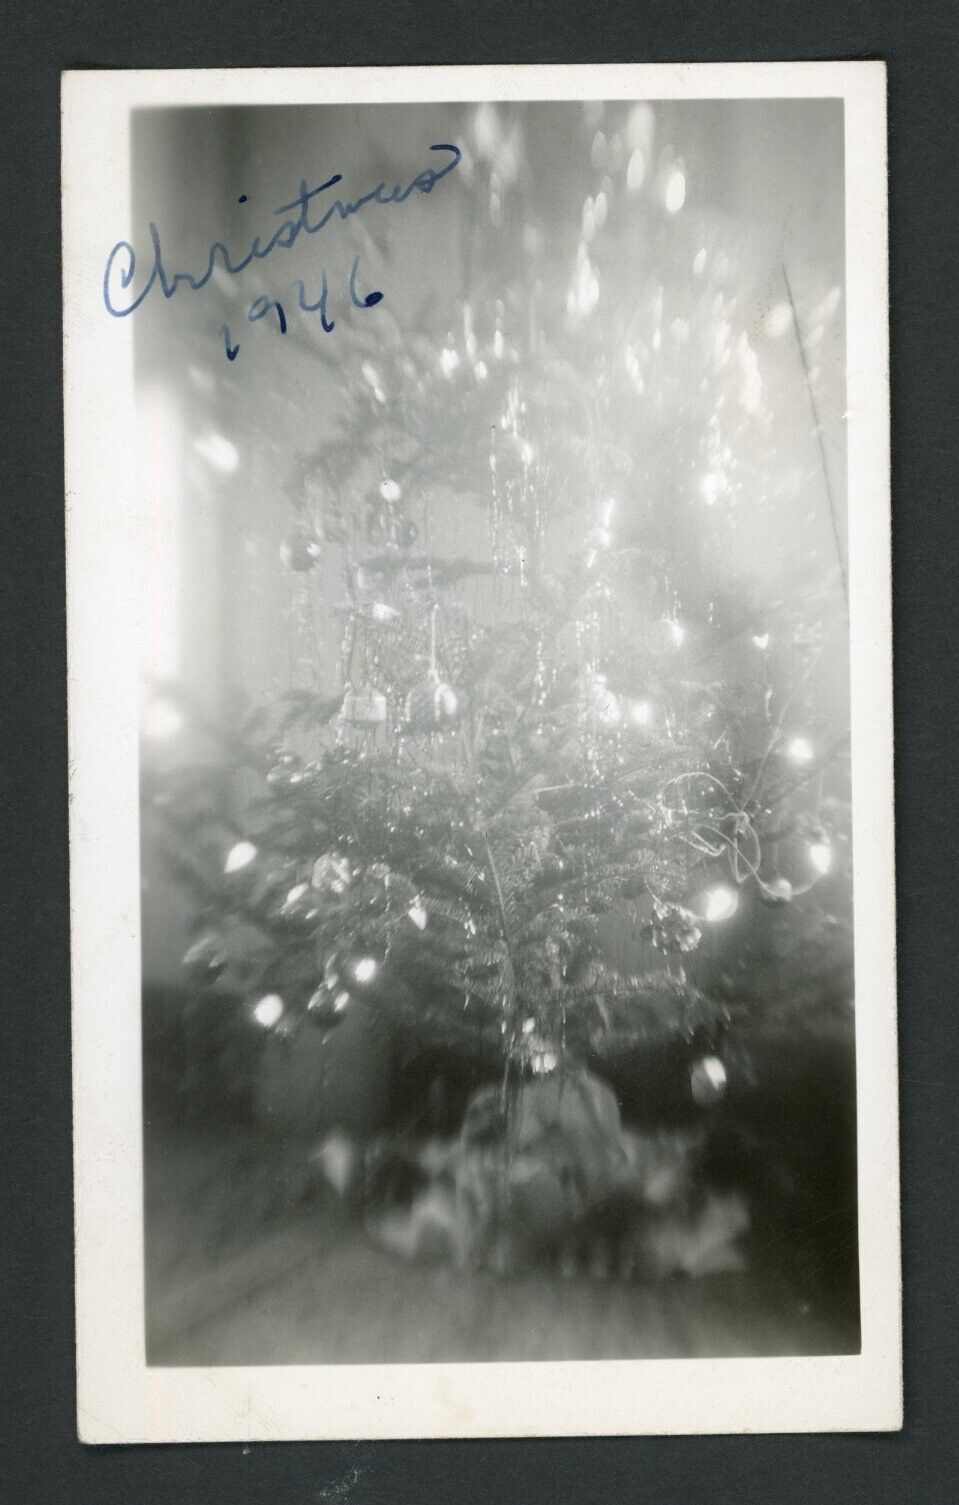 Blurry Christmas Tree Decorations Photo Snapshot 1940s Living Room Abstract